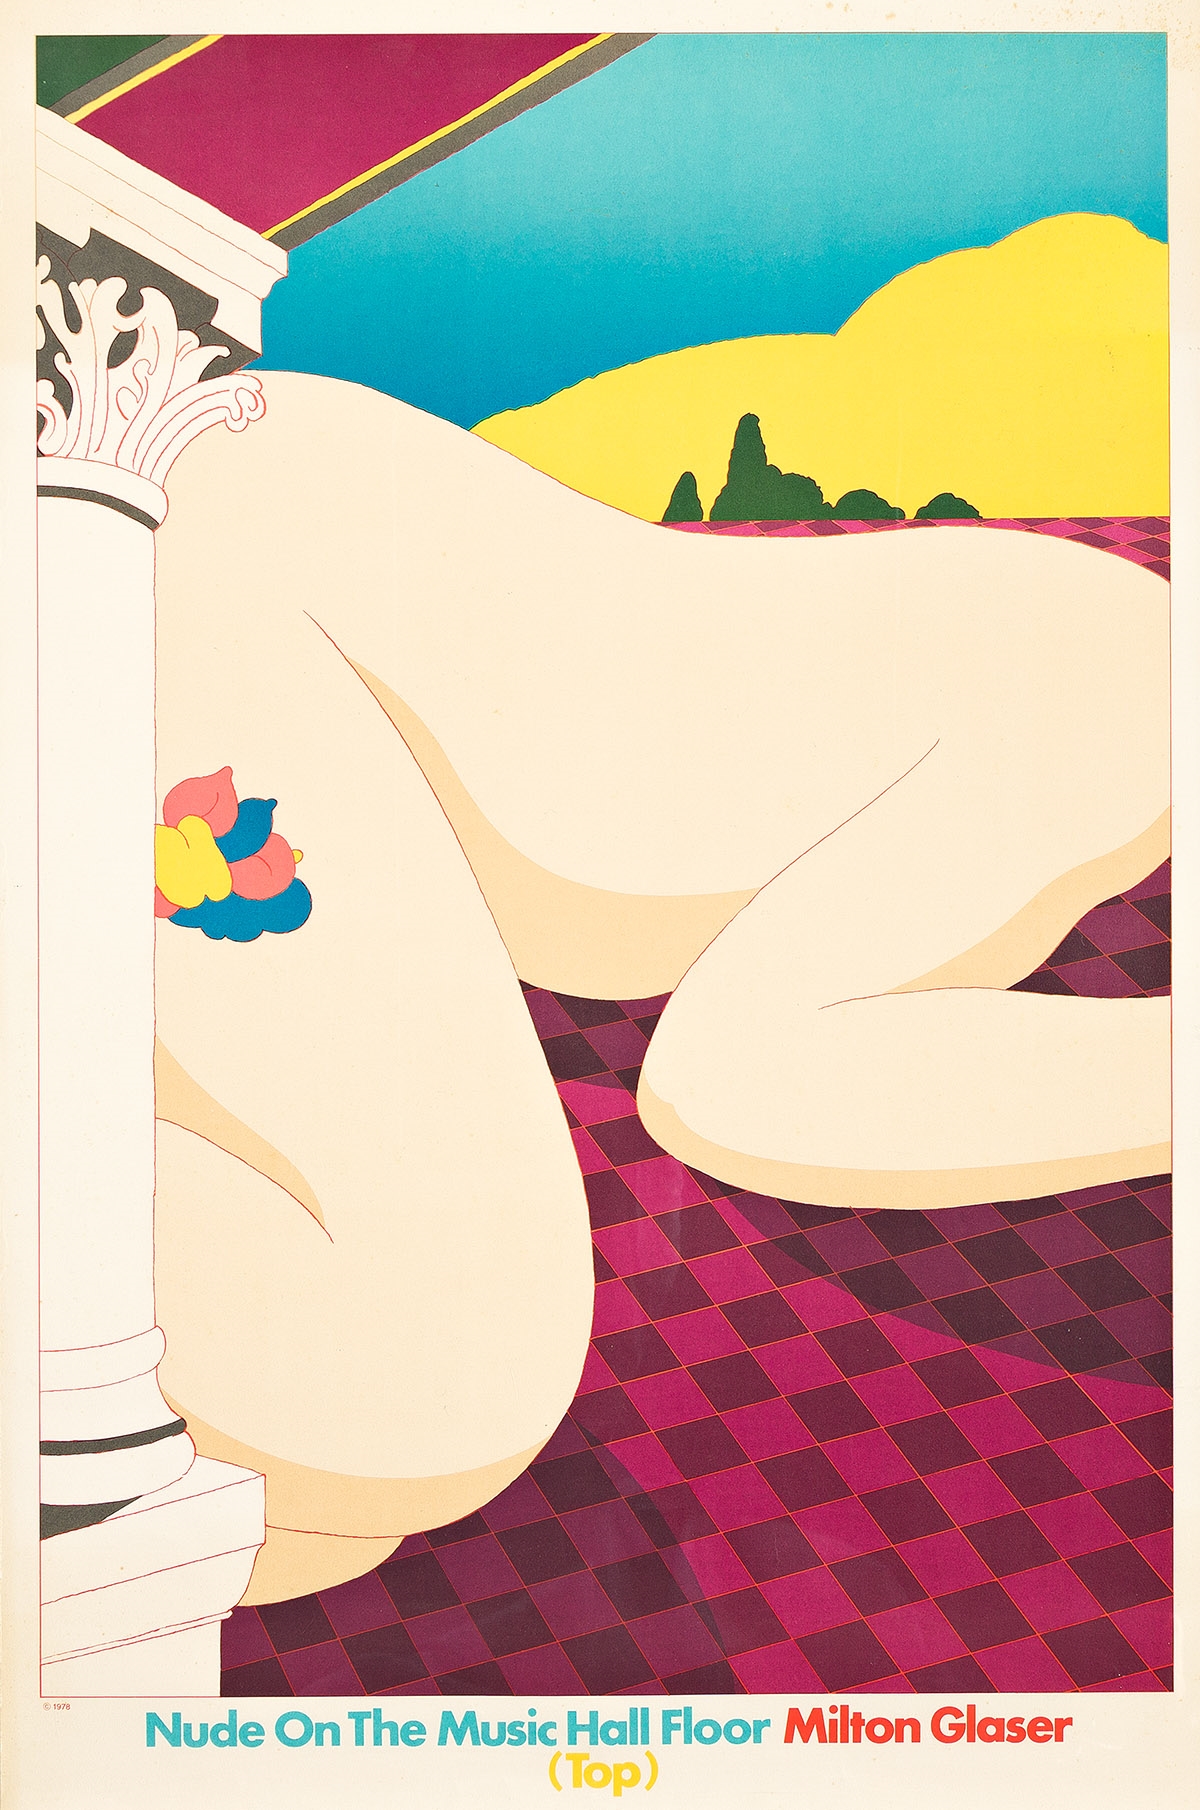 Nudes On The Music Hall Floor (Bottom by Milton Glaser, 1978